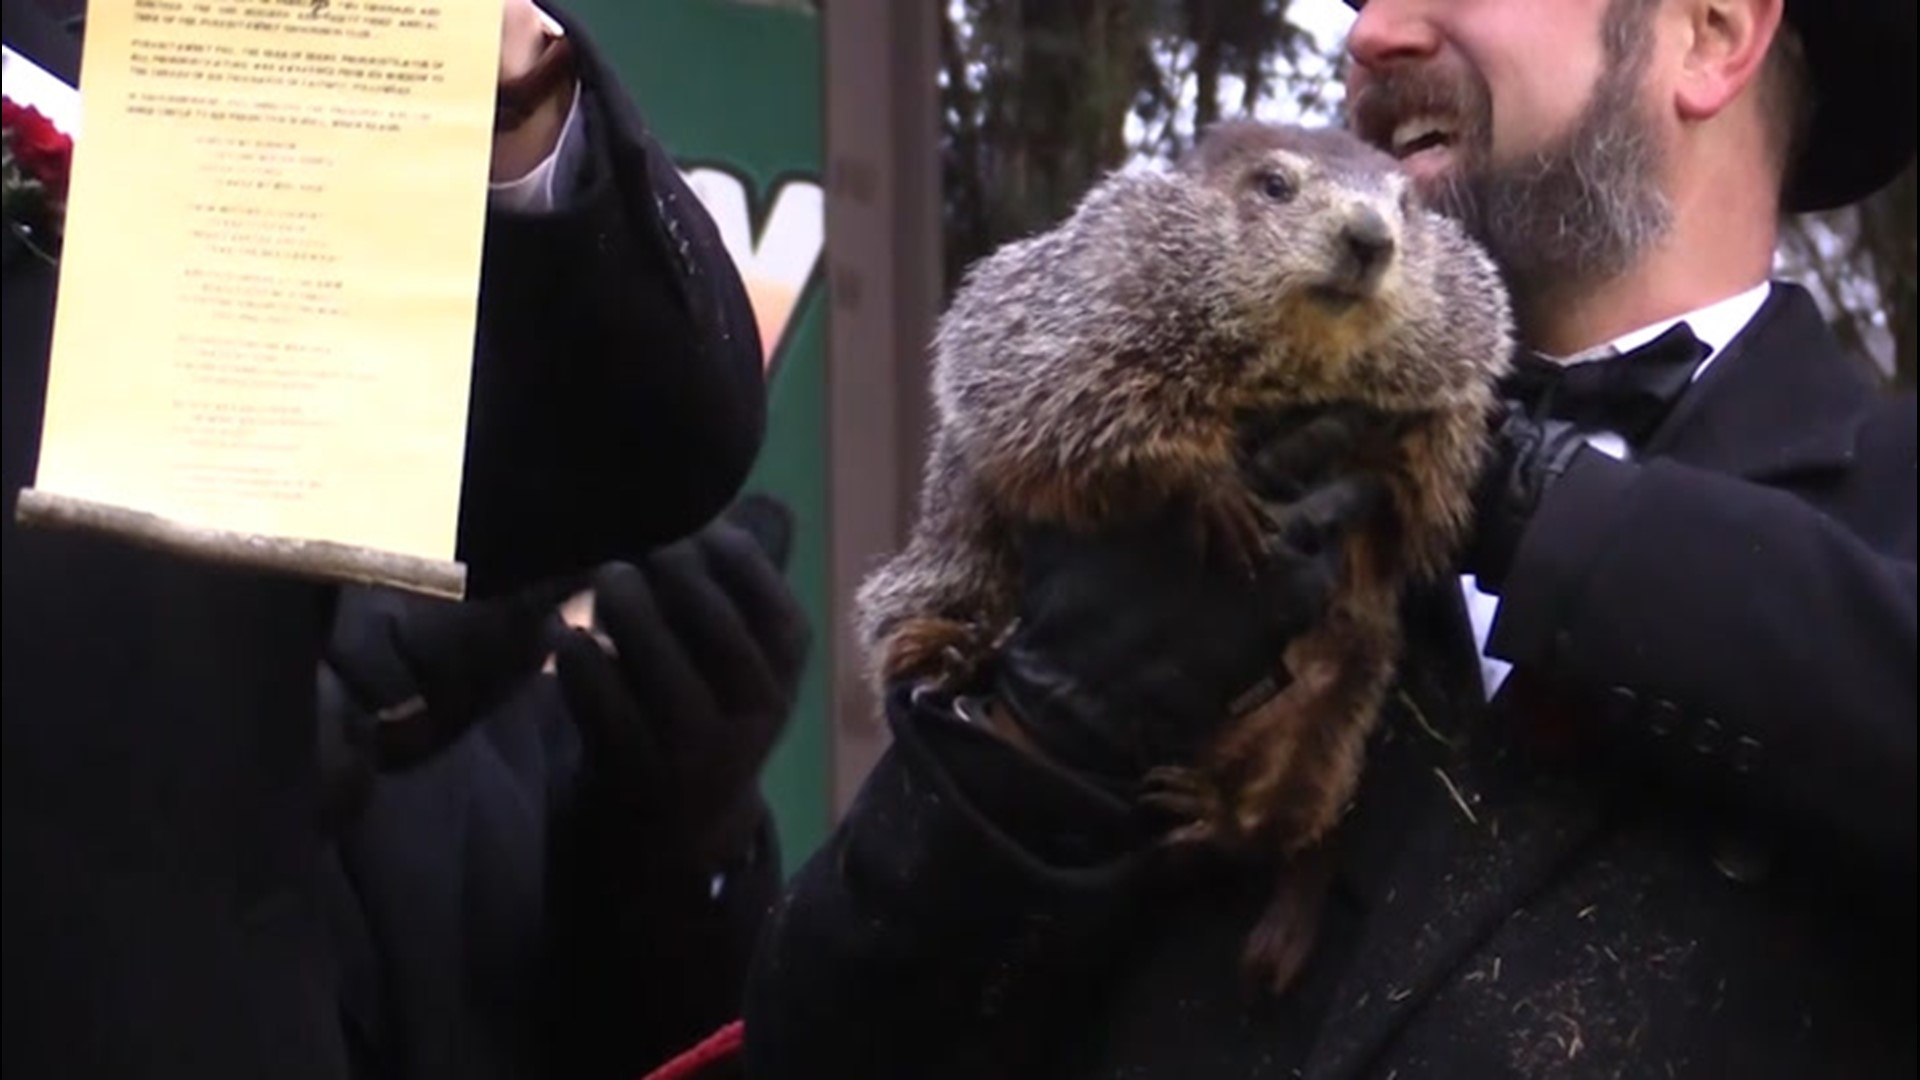 Before Punxsutawney Phil was making predictions for an early spring, another animal was used by German settlers before they brought their animal weather-predicting tradition to America. Let's learn about the origins of Groundhog Day.